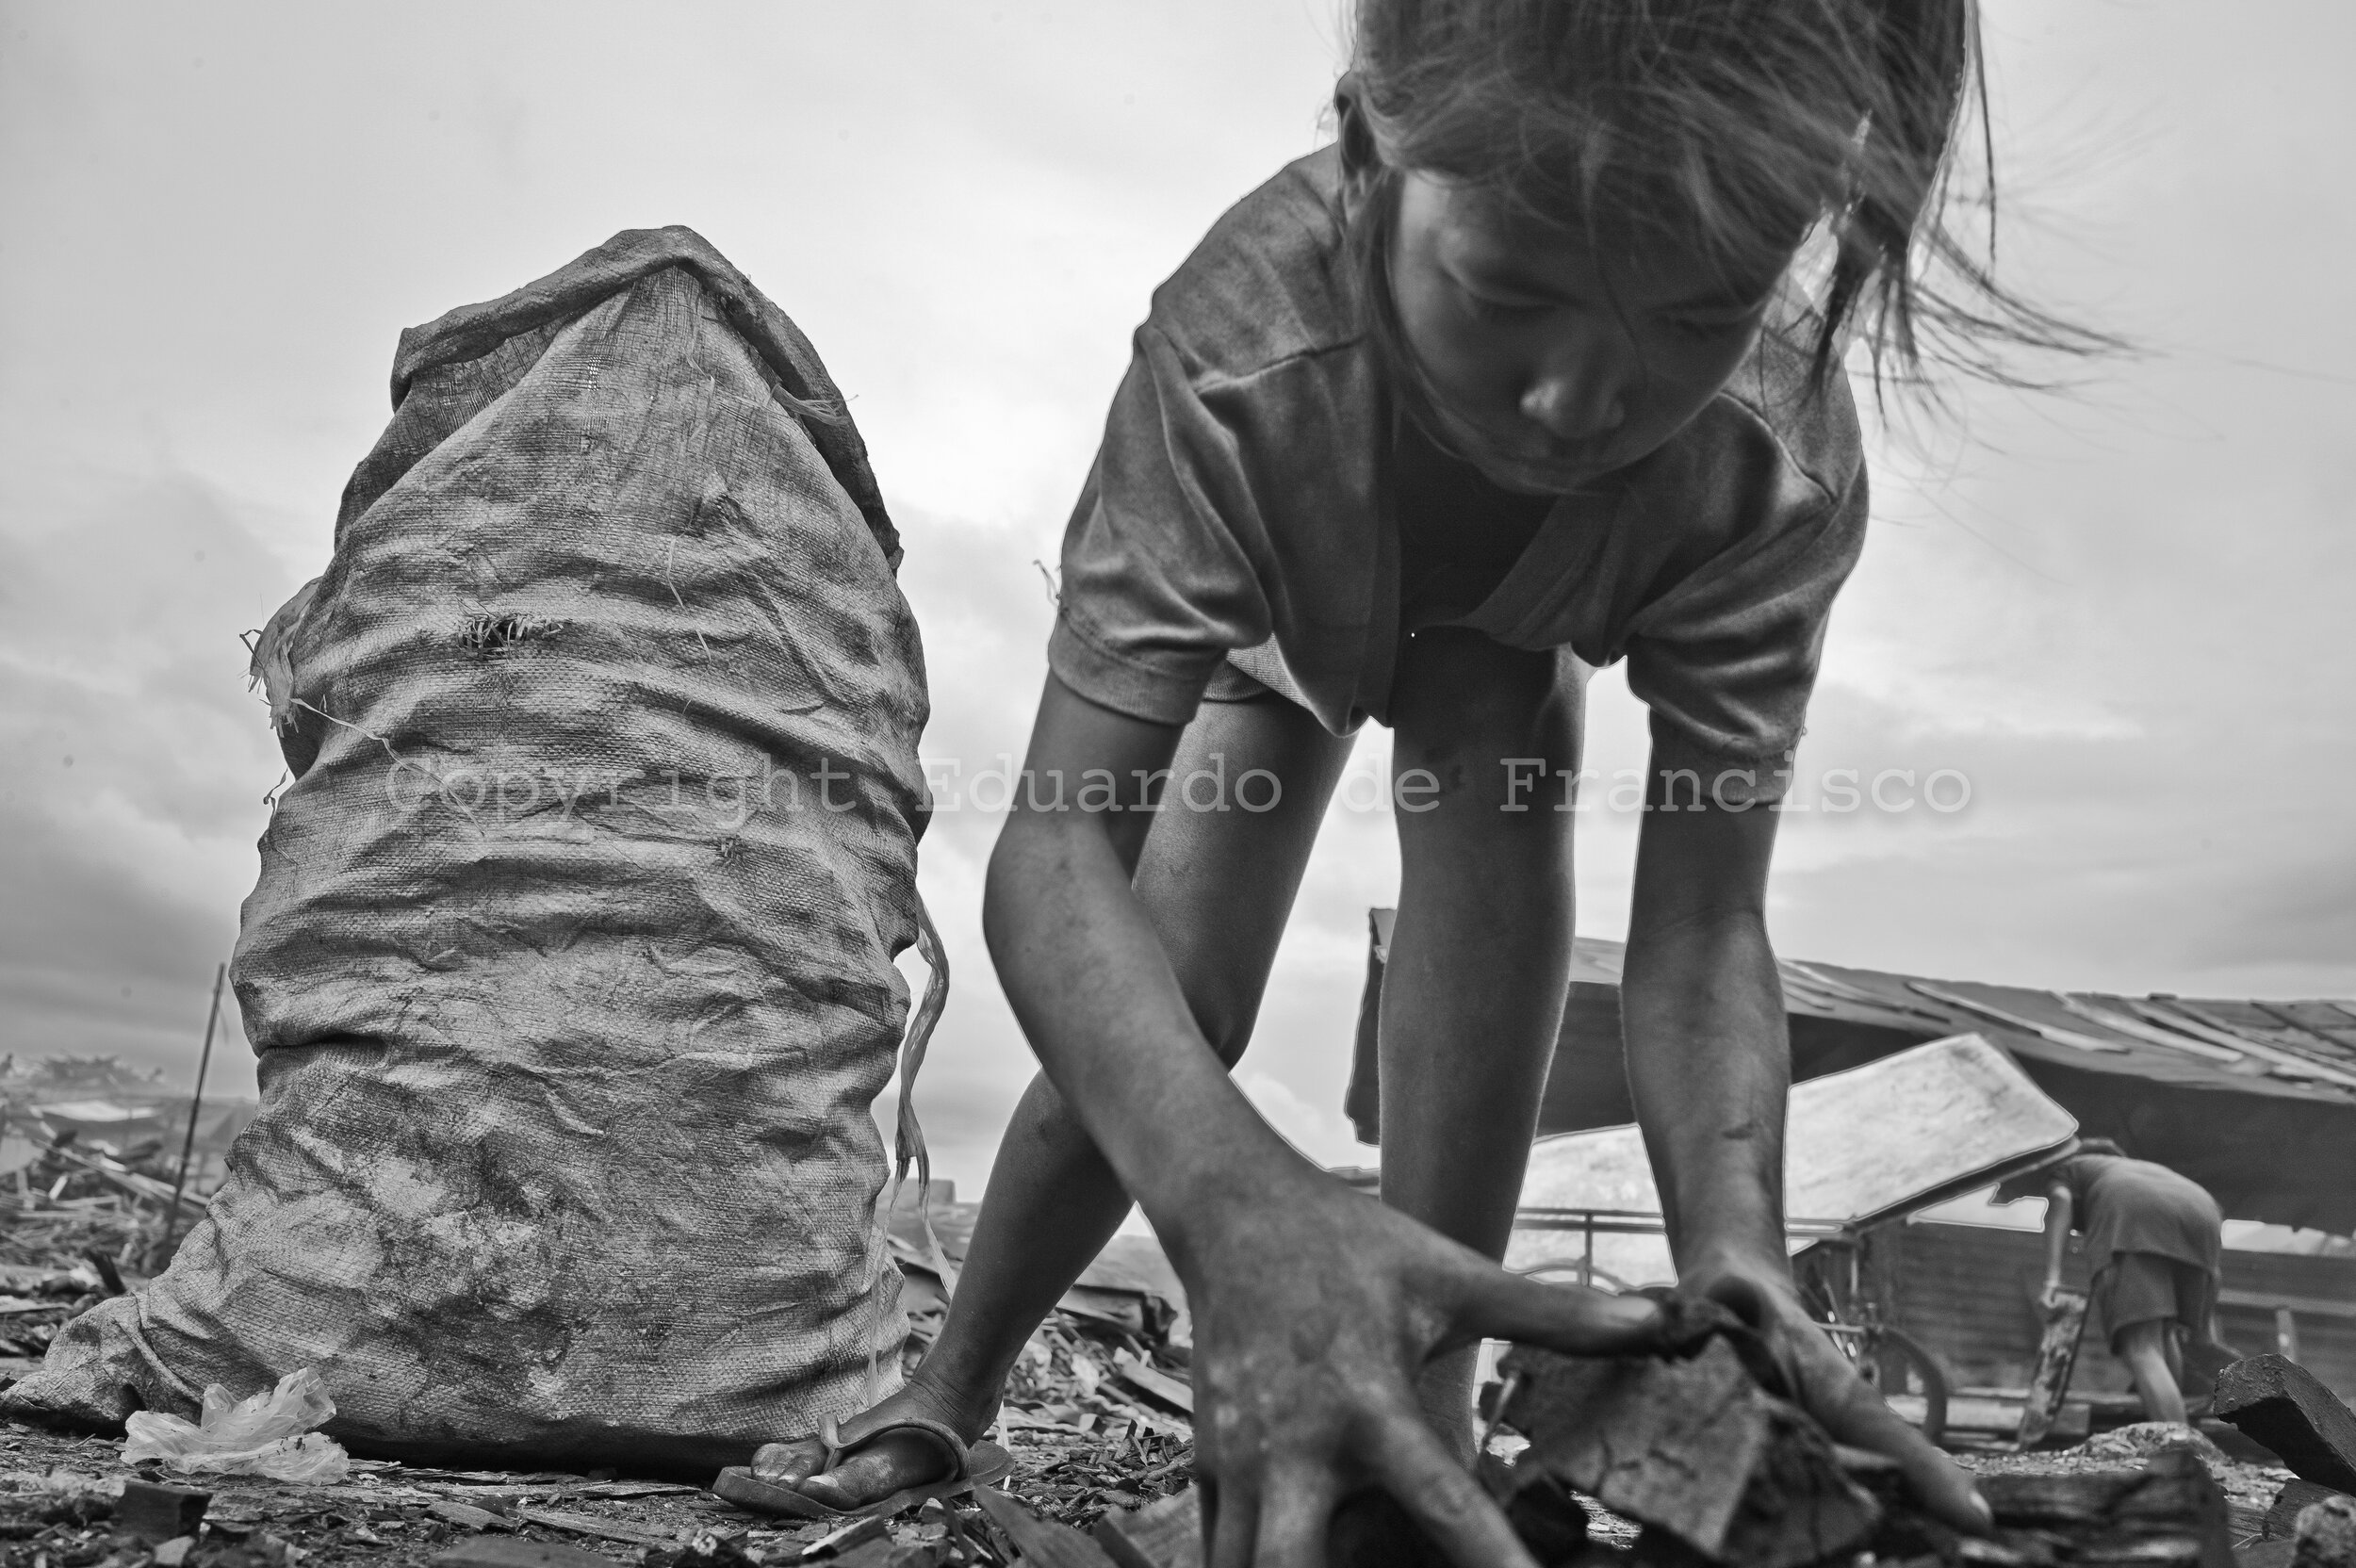  Jasmine, 12 years old. Like the rest of her siblings, she helps the family whenever extra hands are needed. Here, she packs pieces of charcoal into plastic sacks, waiting for the dealer.  In Tondo, in between 500 and 800 families depend on charcoal 